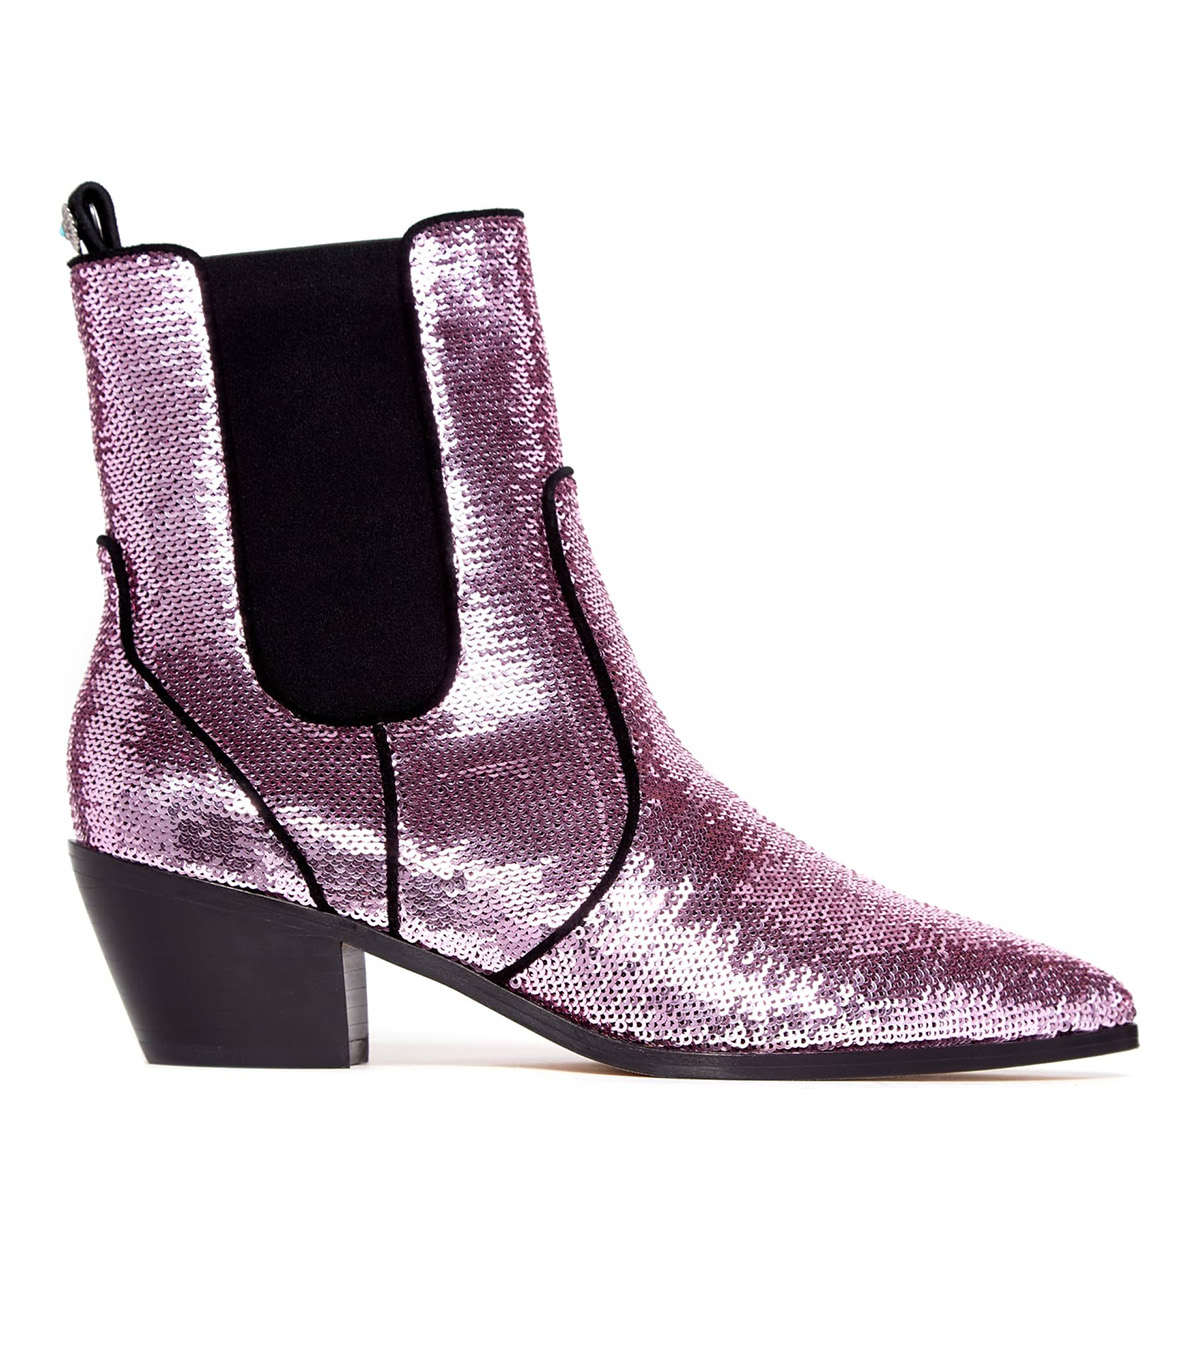 nordstrom pink boots